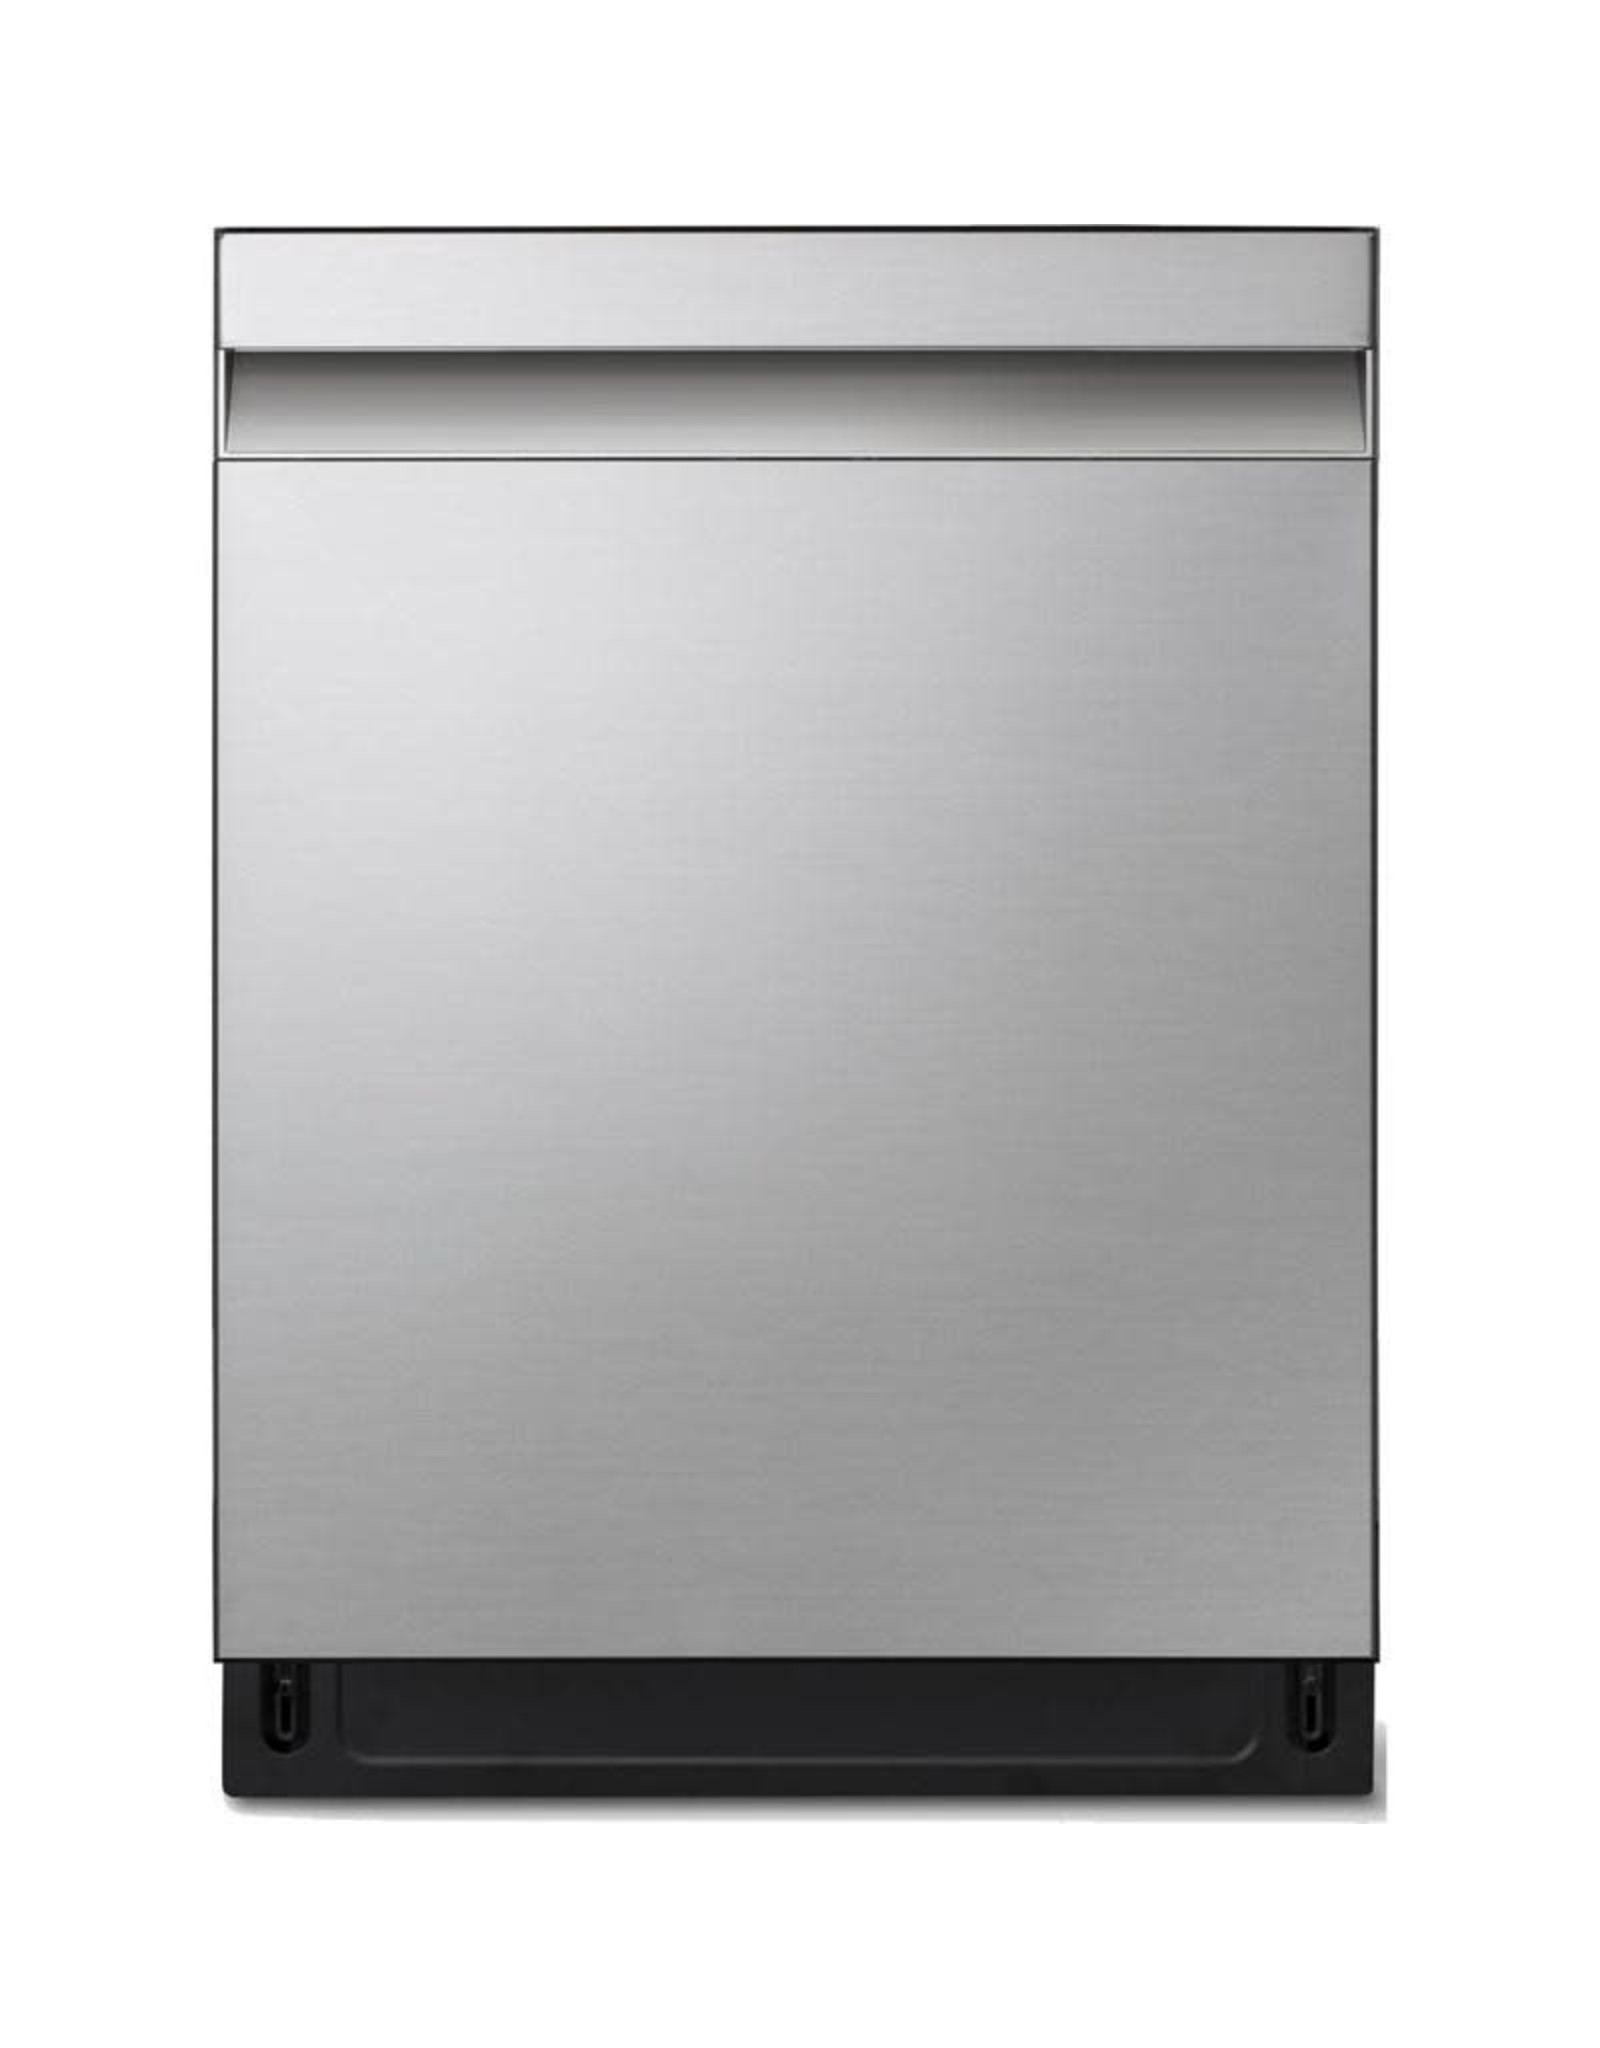 SAMSUNG DW80R9950US  Samsung 24 in. Top Control Tall Tub Linear Wash Dishwasher in Fingerprint Resistant Stainless, 3rd Rack, AutoRelease, 39 dBA